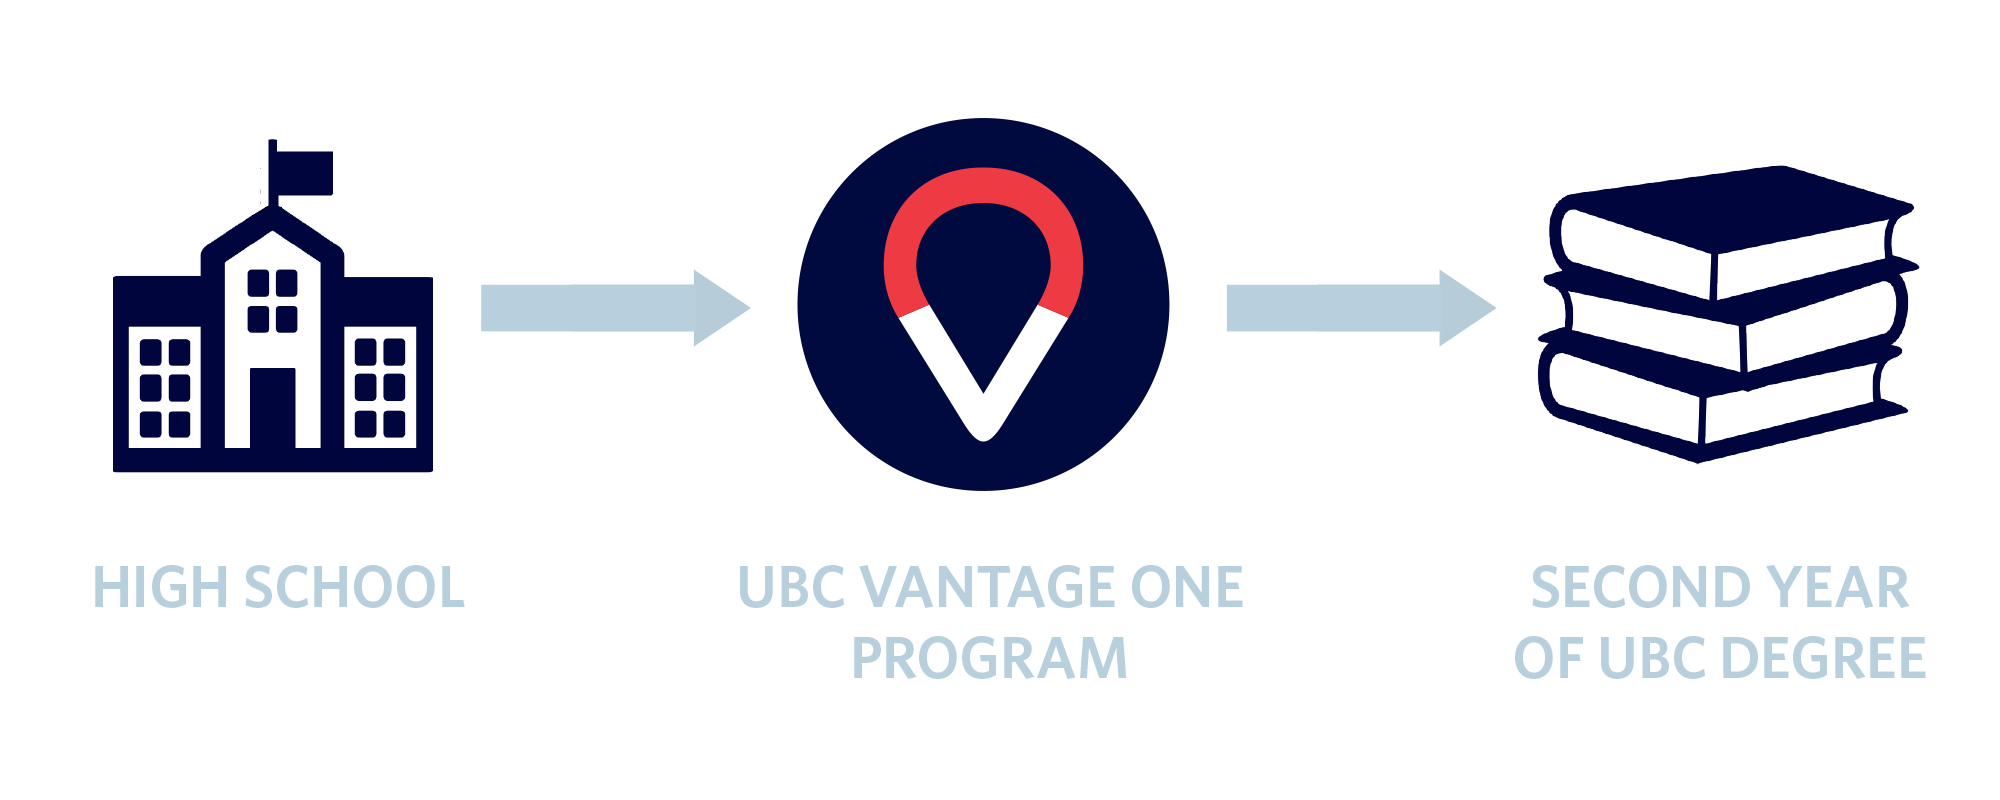 Vantage one progression to year 2 of your UBC degree.